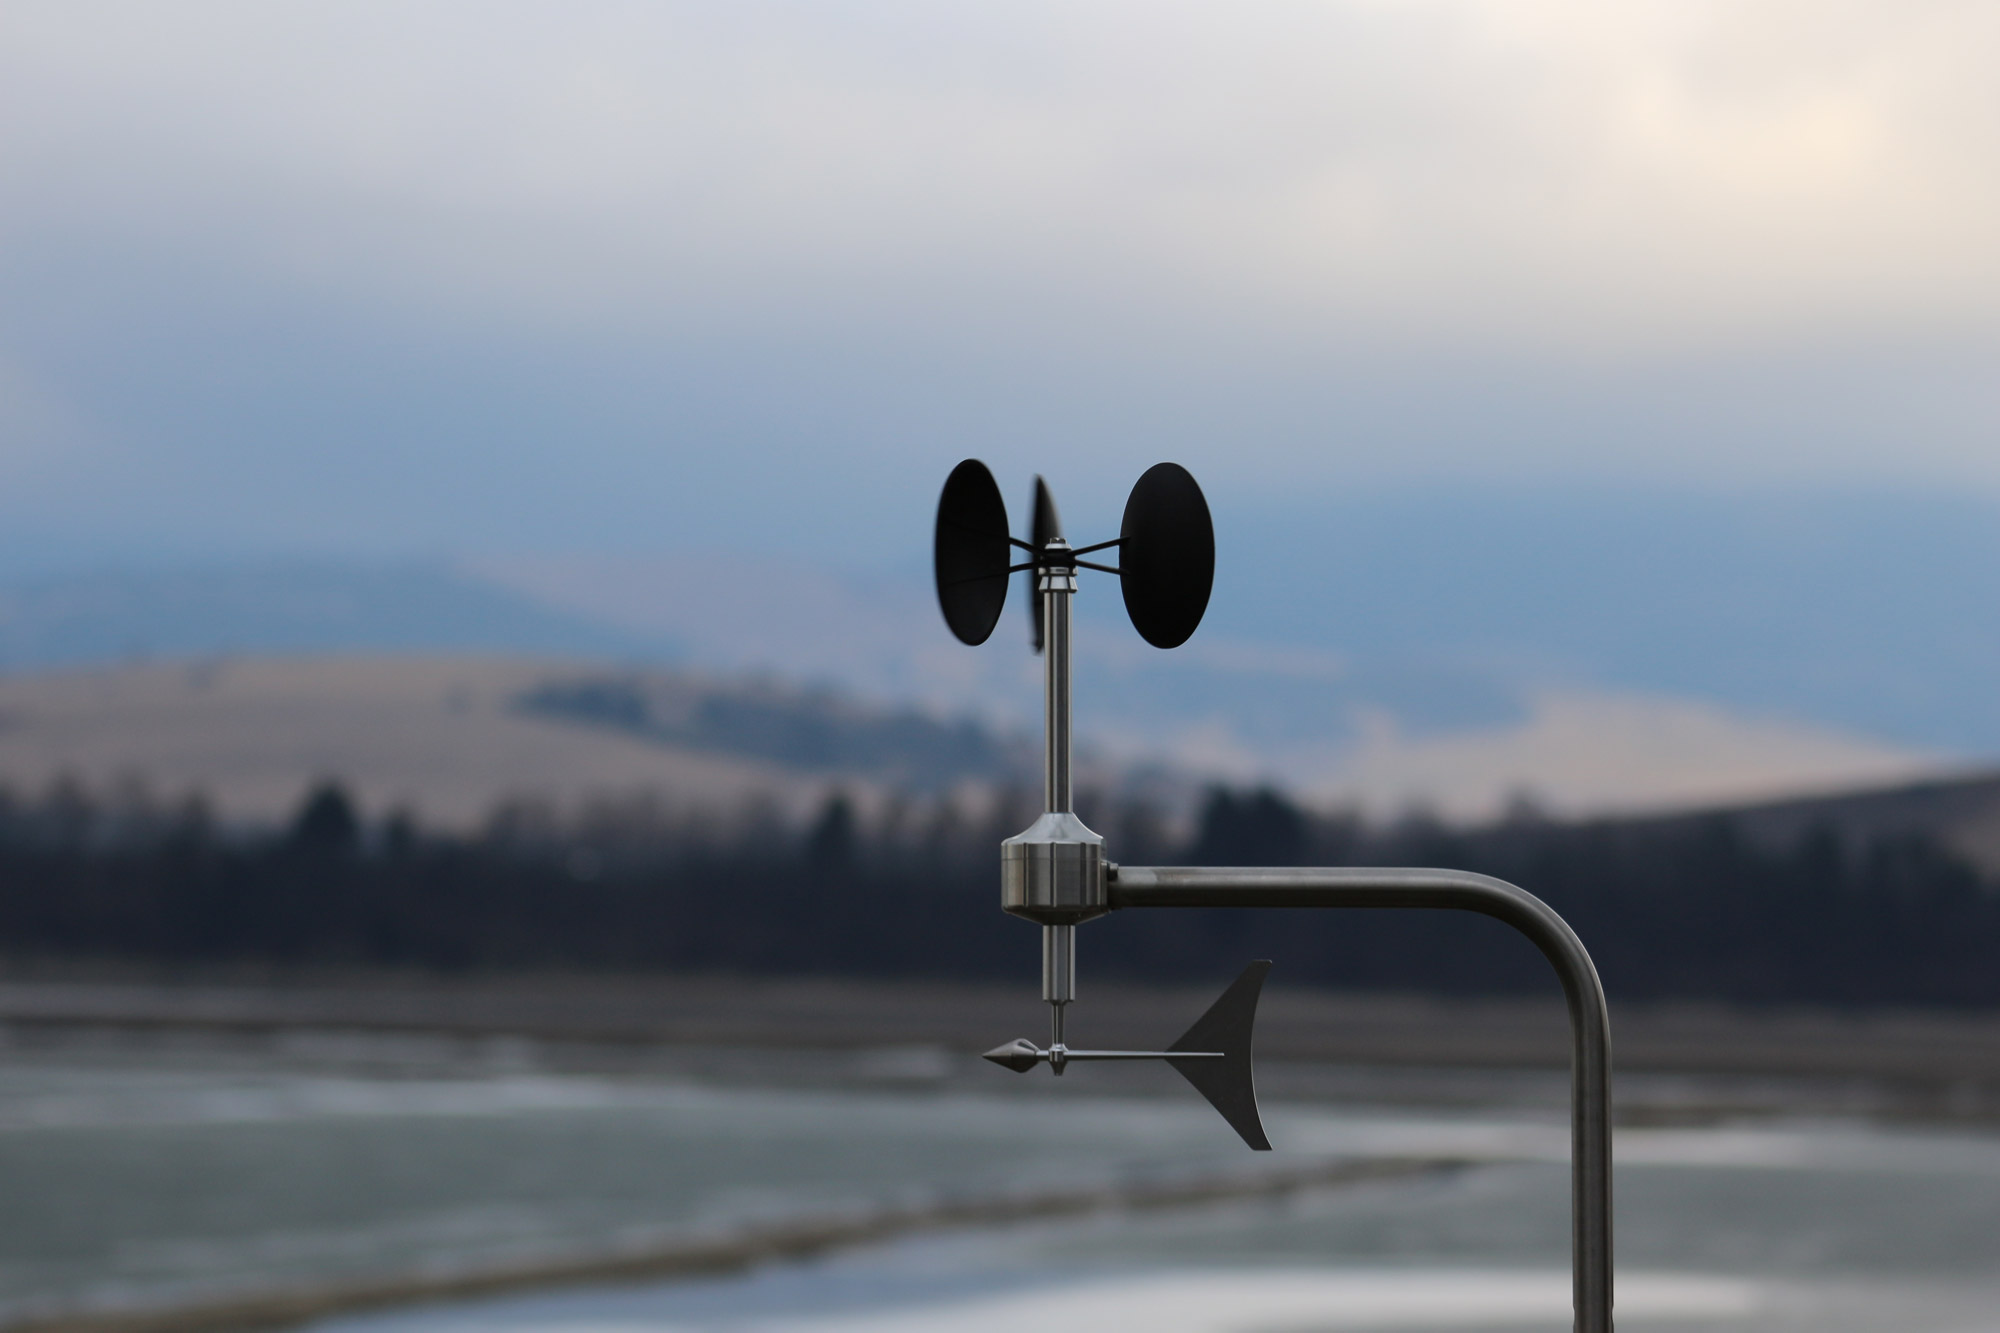 MeteoWind anemometer with mountains & lake shore